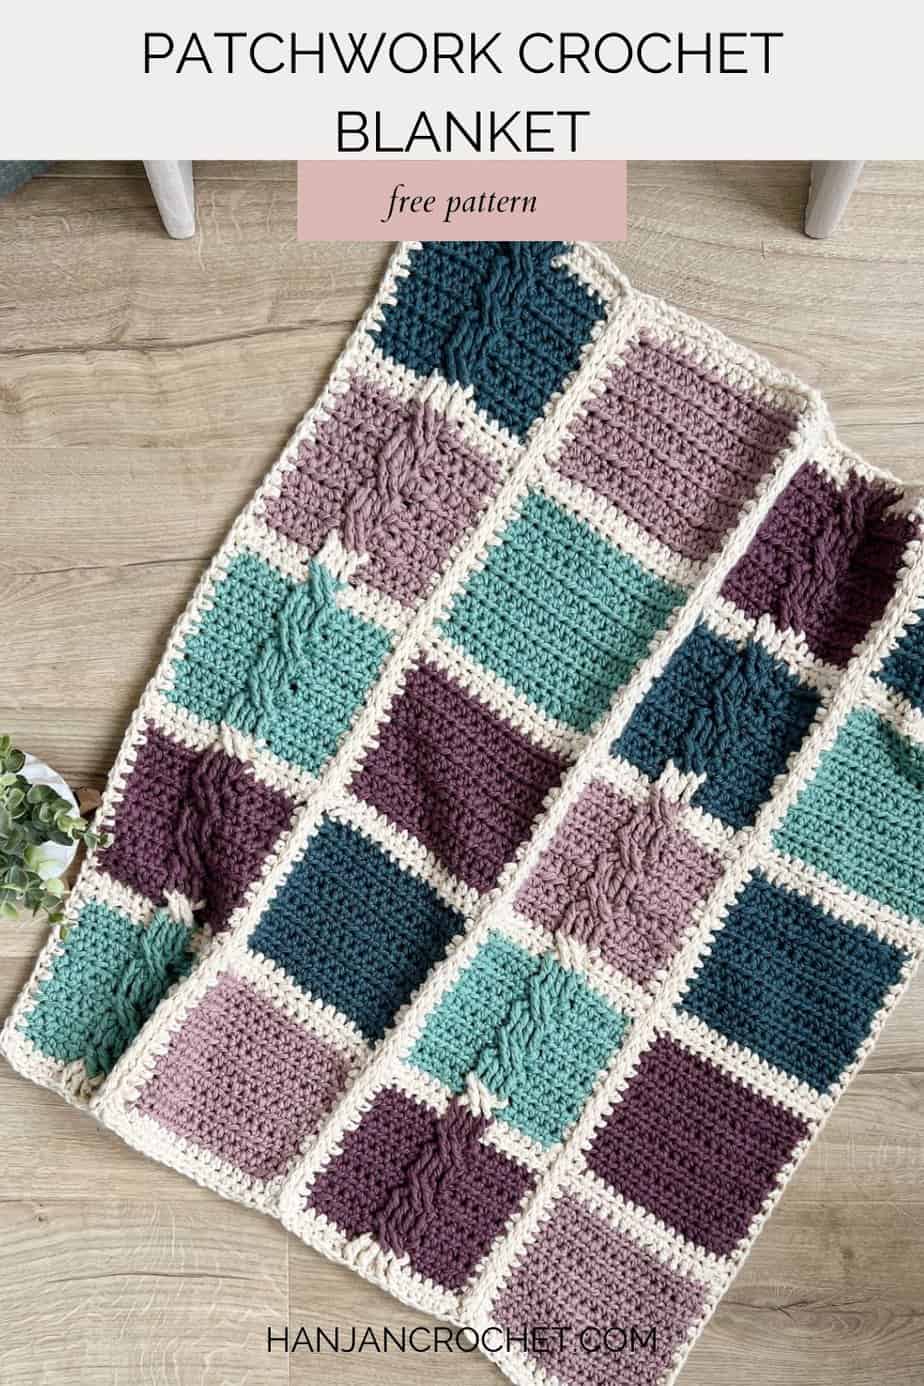 Beginner patchwork crochet blanket in bulky yarn with cable stitch.